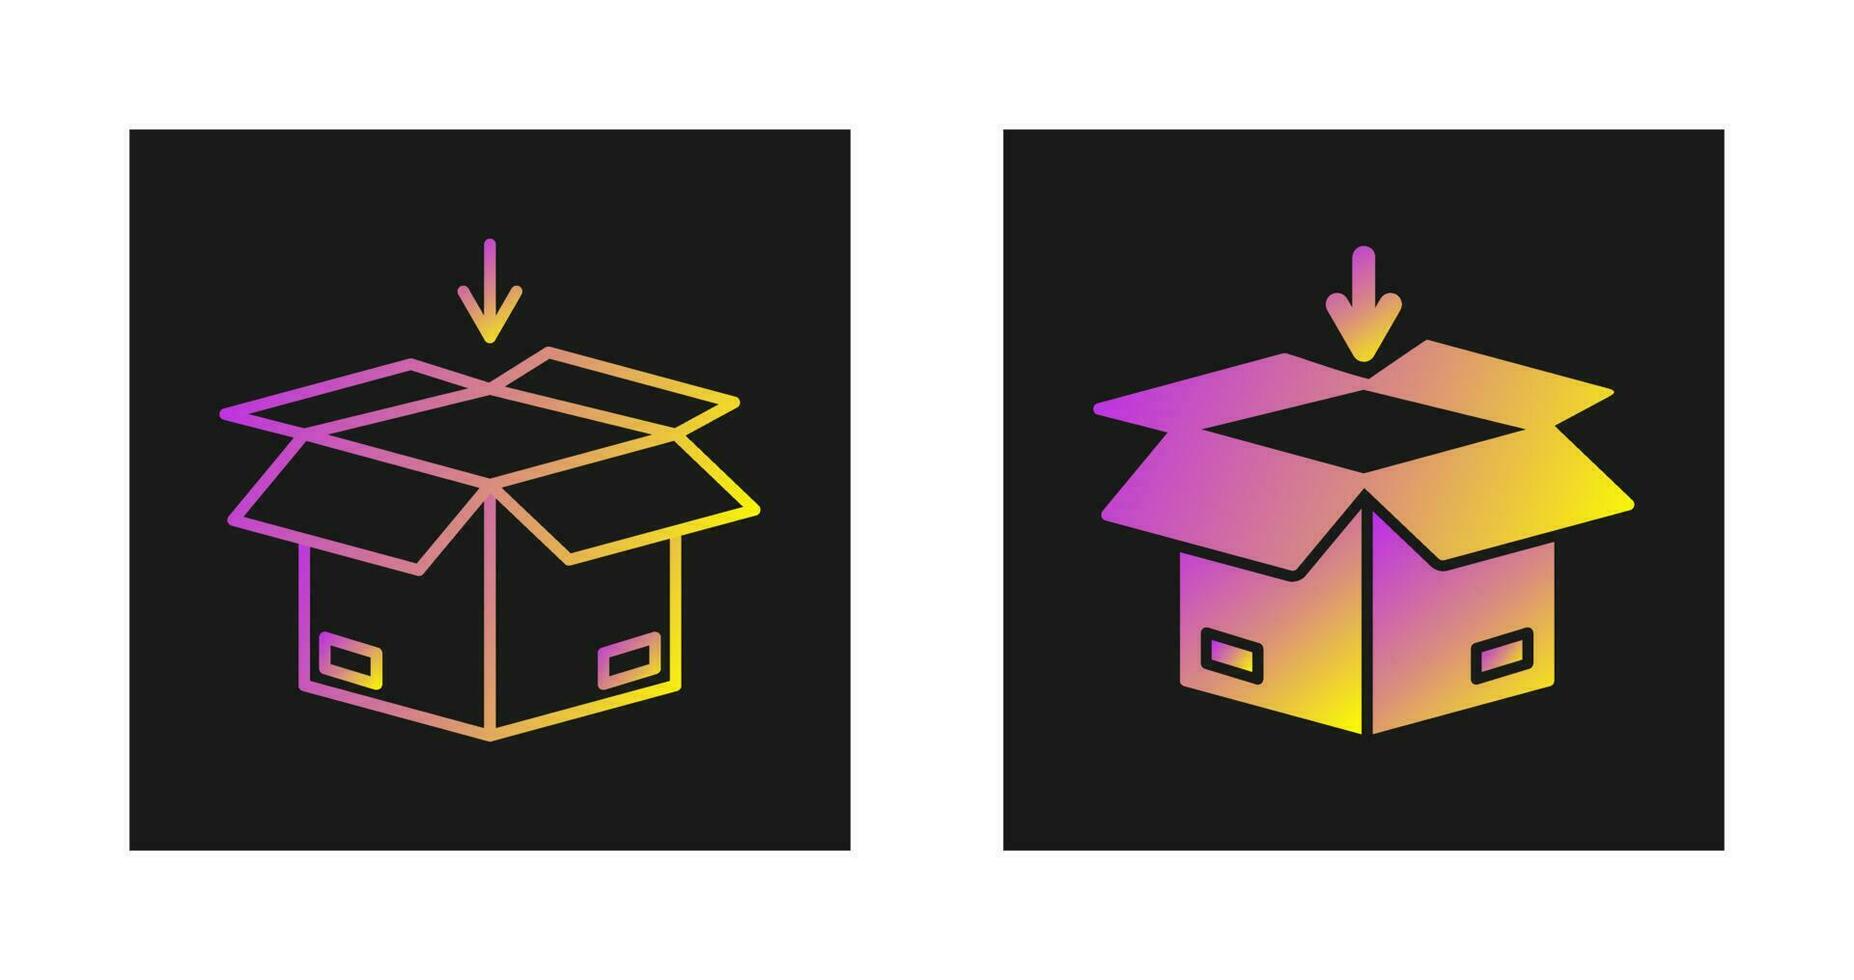 Add to Package Vector Icon